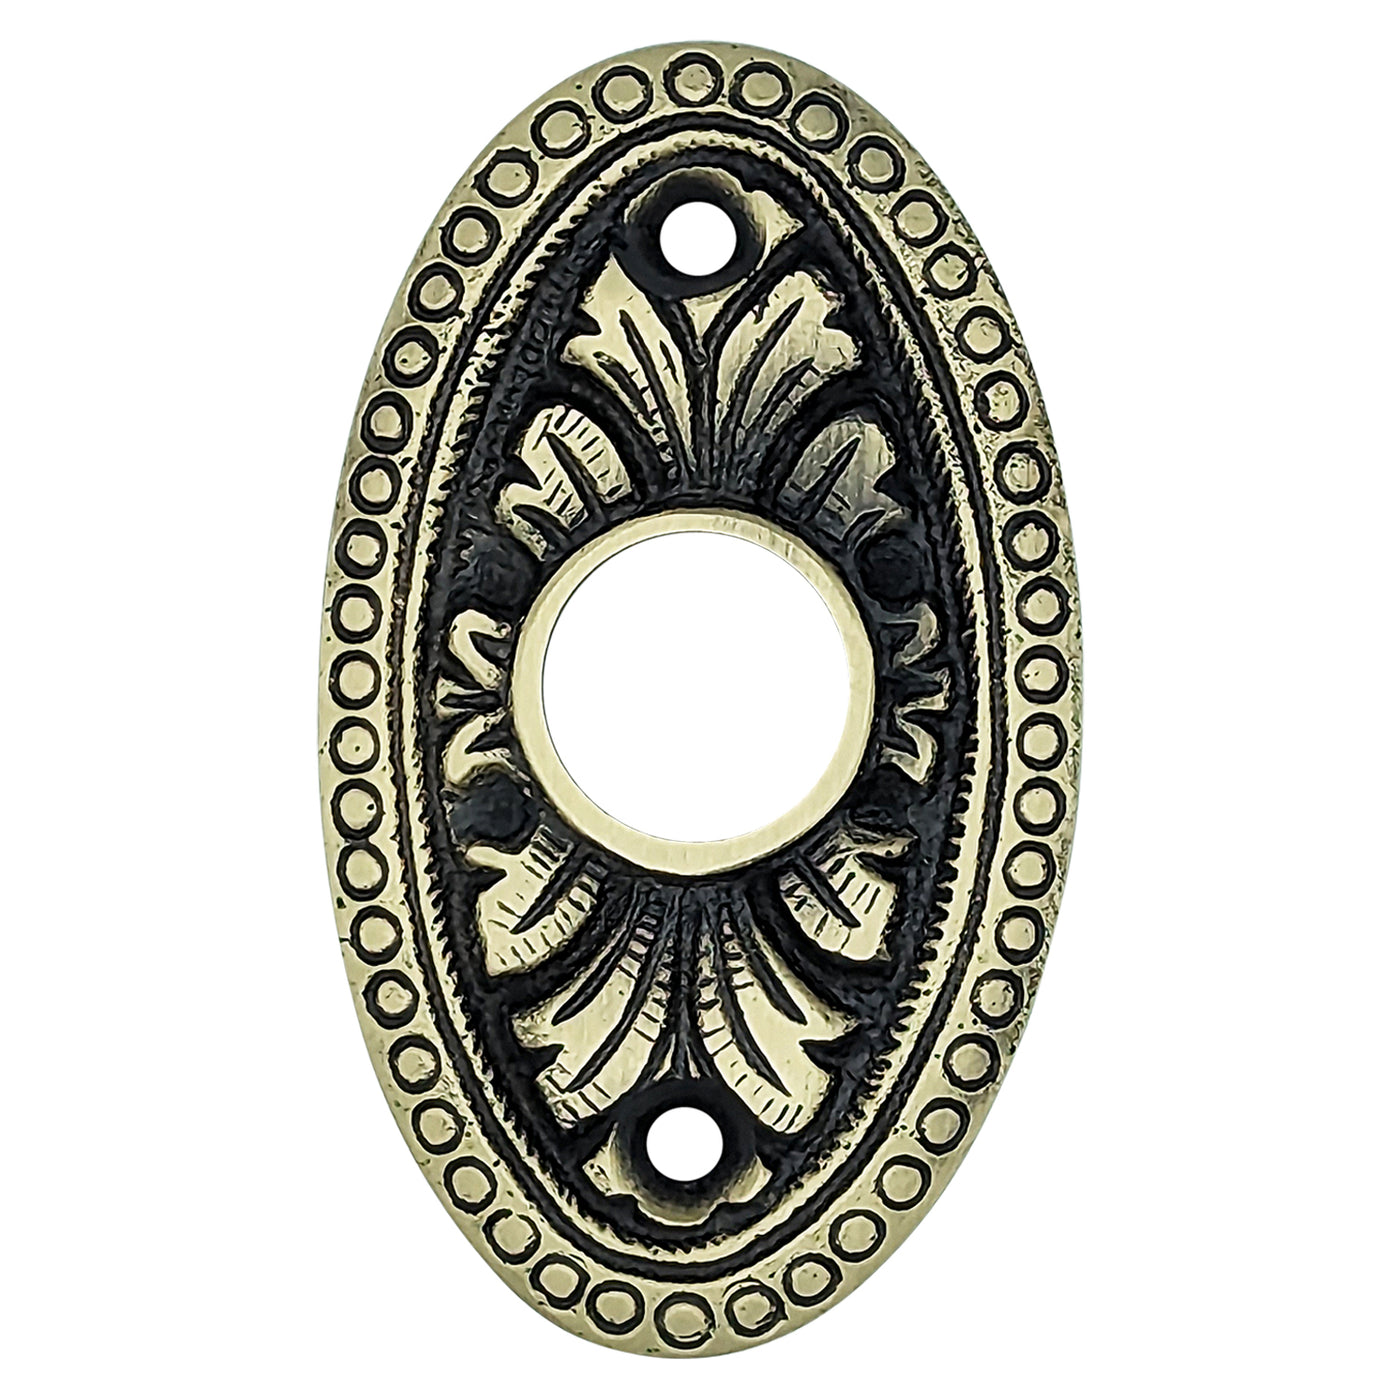 2 5/8 Inch Solid Brass Avalon Style Rosette (Antique Brass Finish)